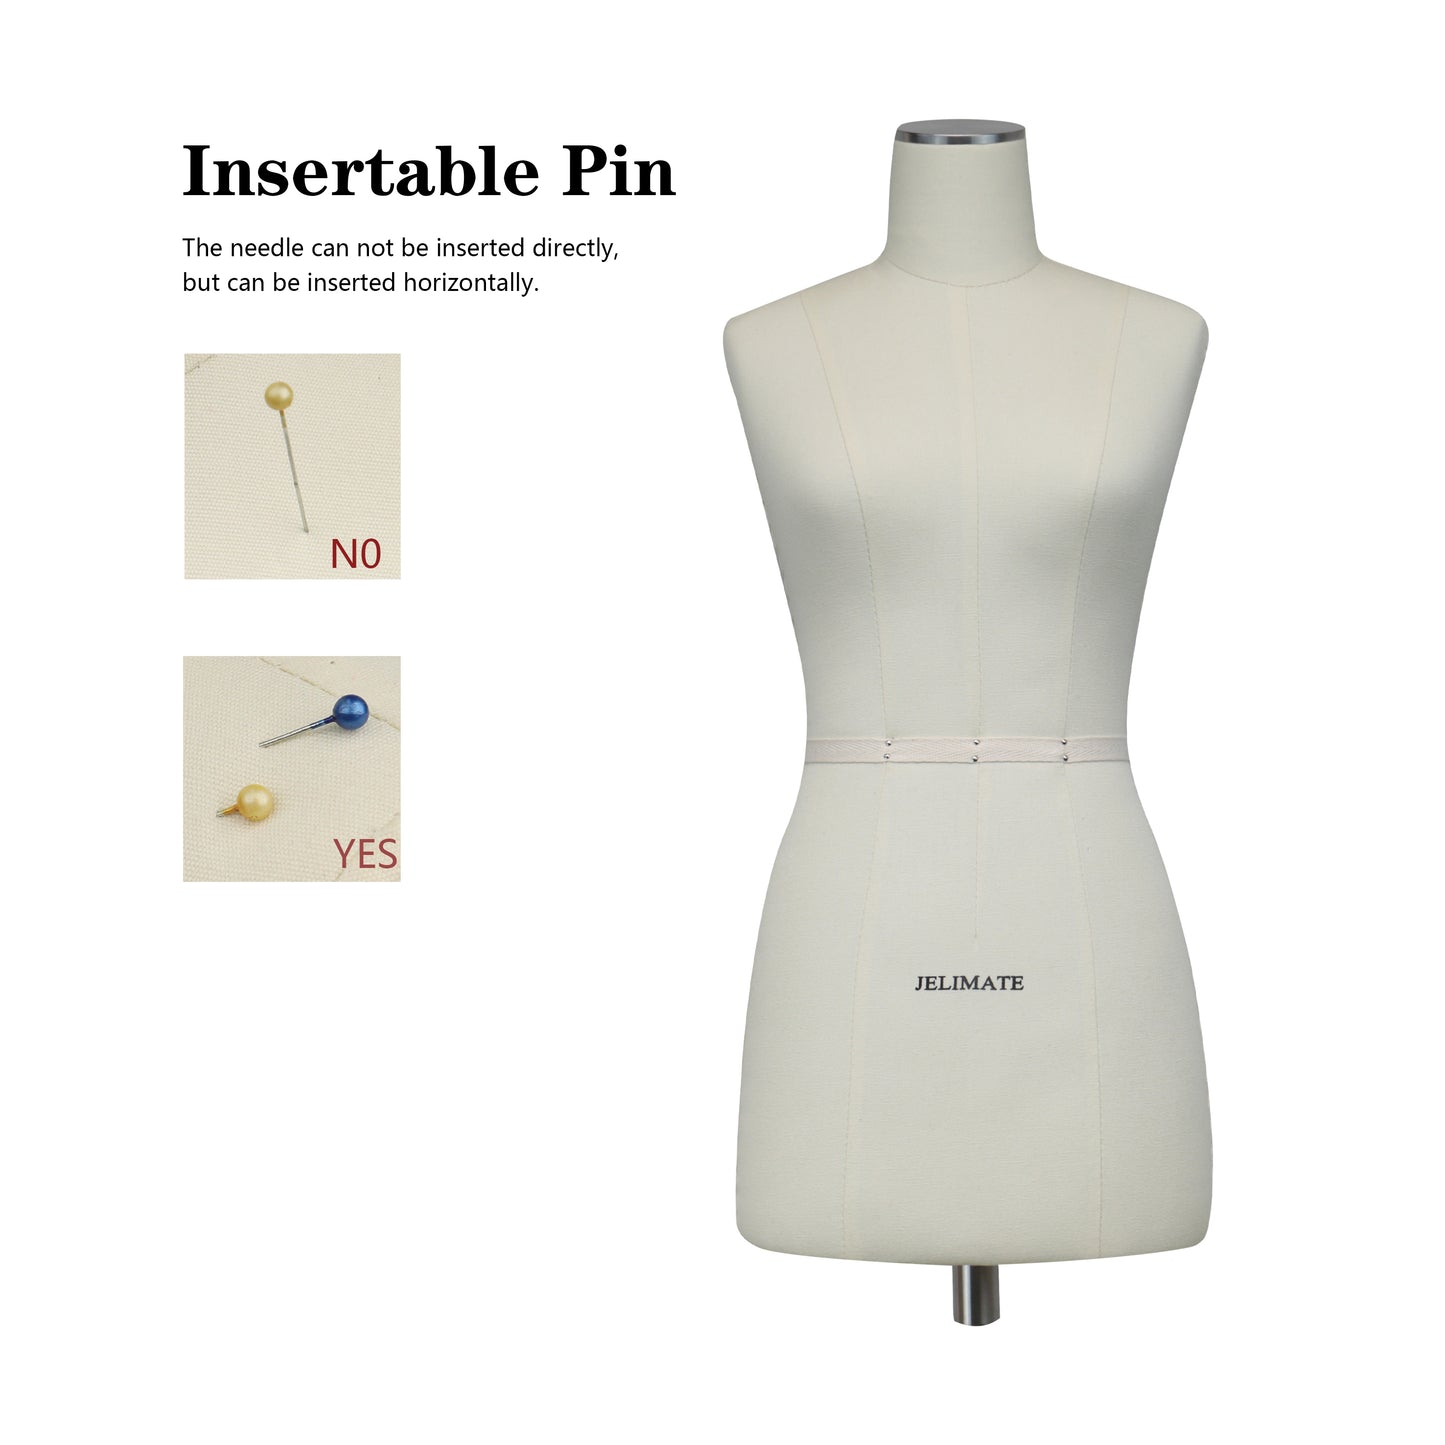 JM260 SIZE12 Half Scale Female Dress Form For Pattern Making,1/2 Scale Miniature Sewing Mannequin for Women,Mini Tailor Mannequin for Fashion Designer Fashion School Draping Mannequin